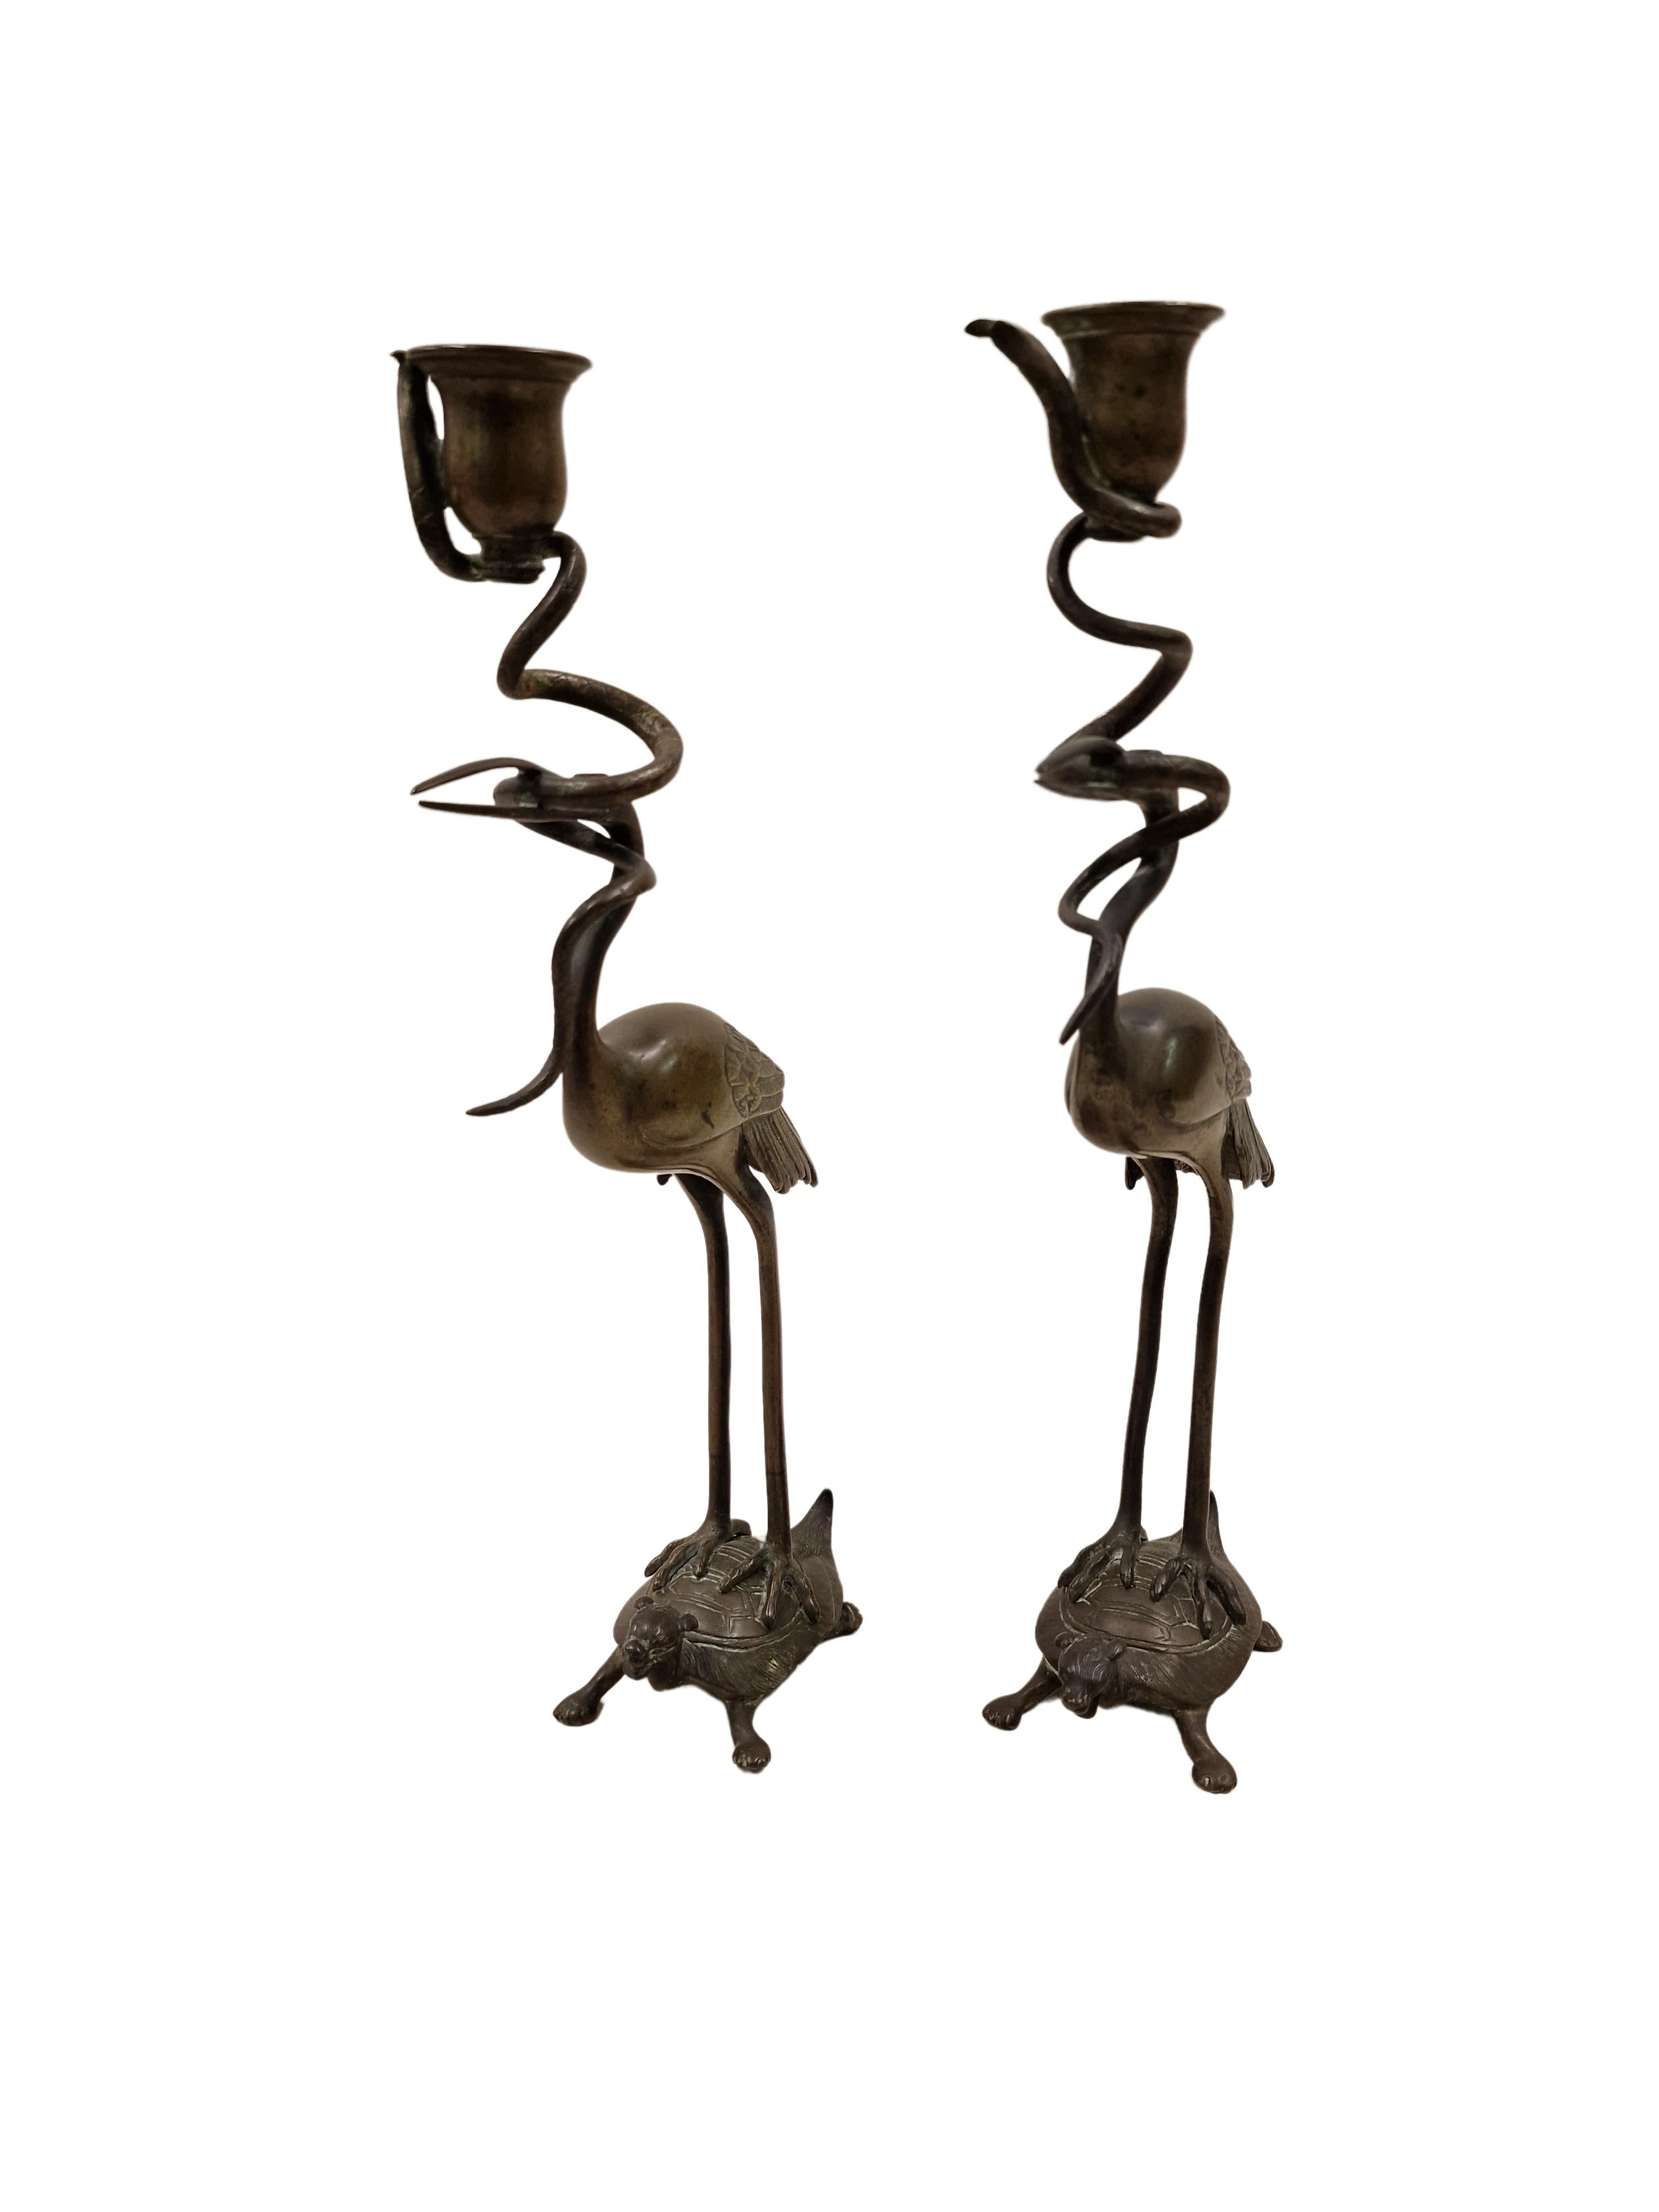 Pair of figural candlesticks, made out of bronze from the Napoleon III era, datable in the 1880s, from France. These two candlesticks are an excellent example of a french high quality bronze work. 
About the design: Two stylized turtles serve as a